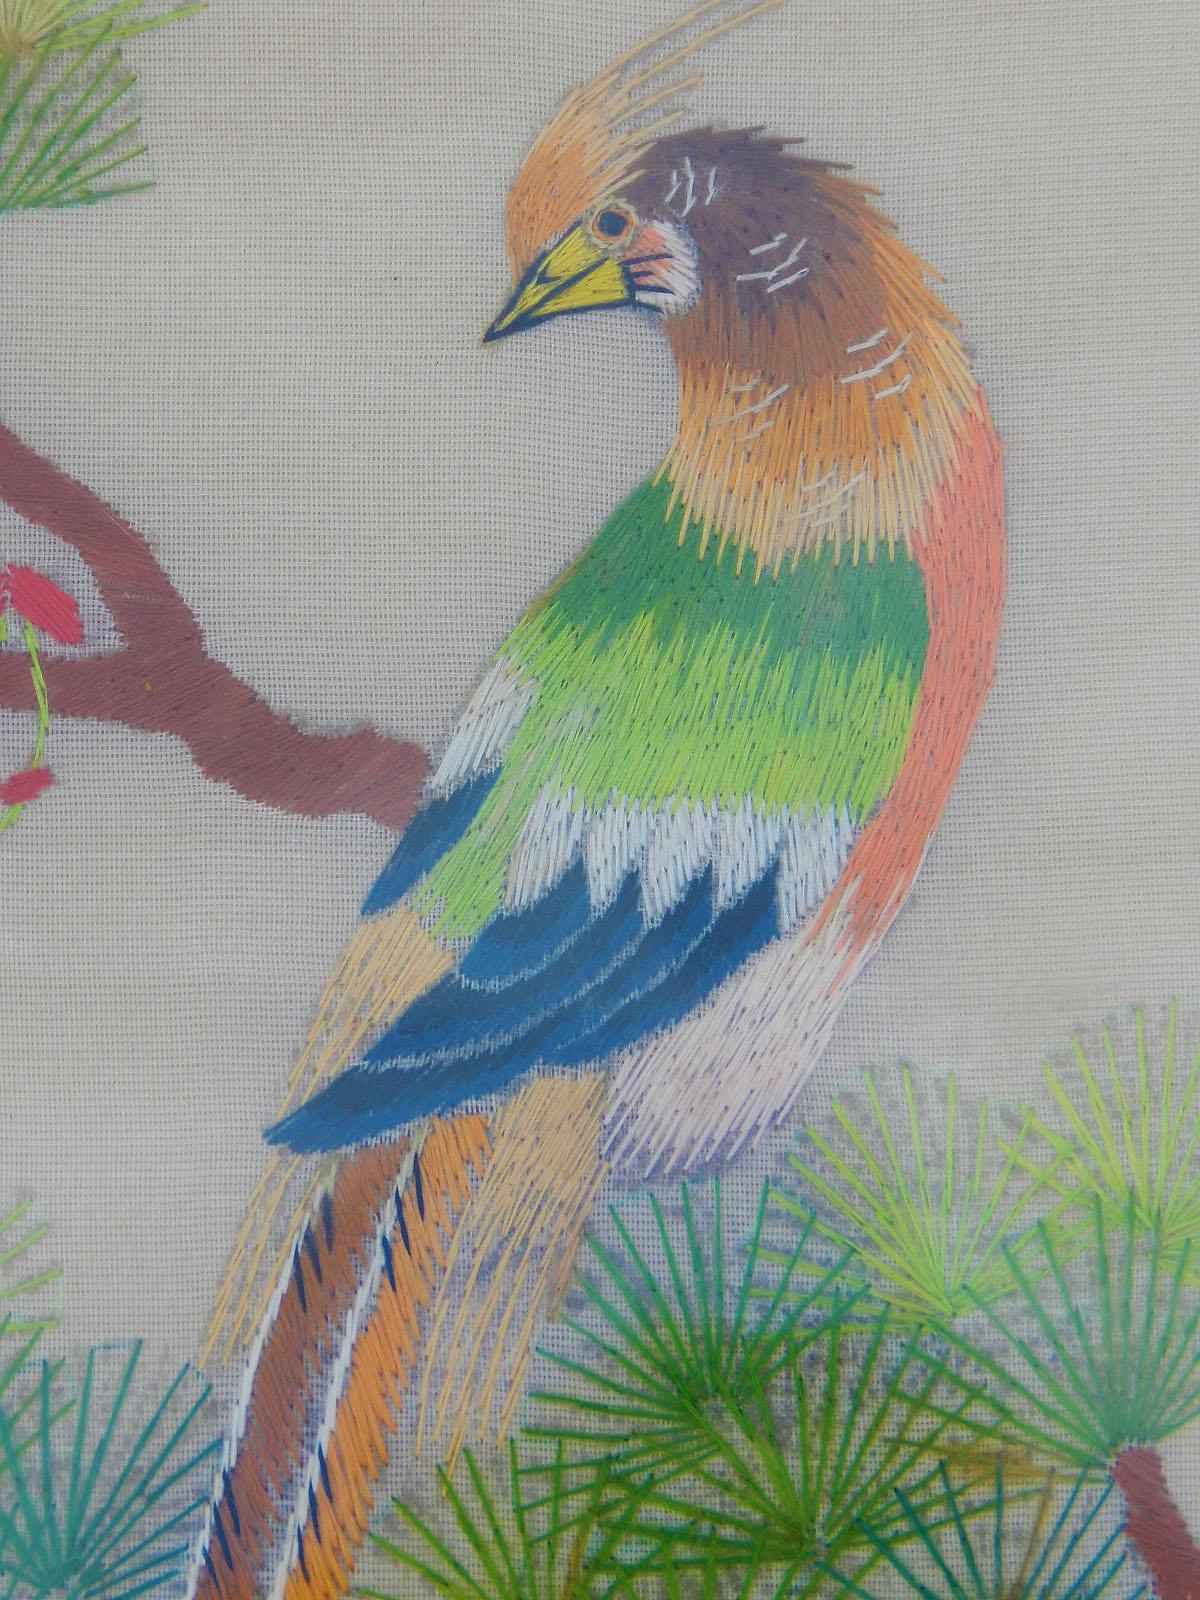 Chinoiserie embroidery picture decorative birds and flowers, circa 1950-1960
In gold frame
We will ship this in its frame, however please bear in mind that we are unable to guarantee that the glass will not break in transit when shipped as a